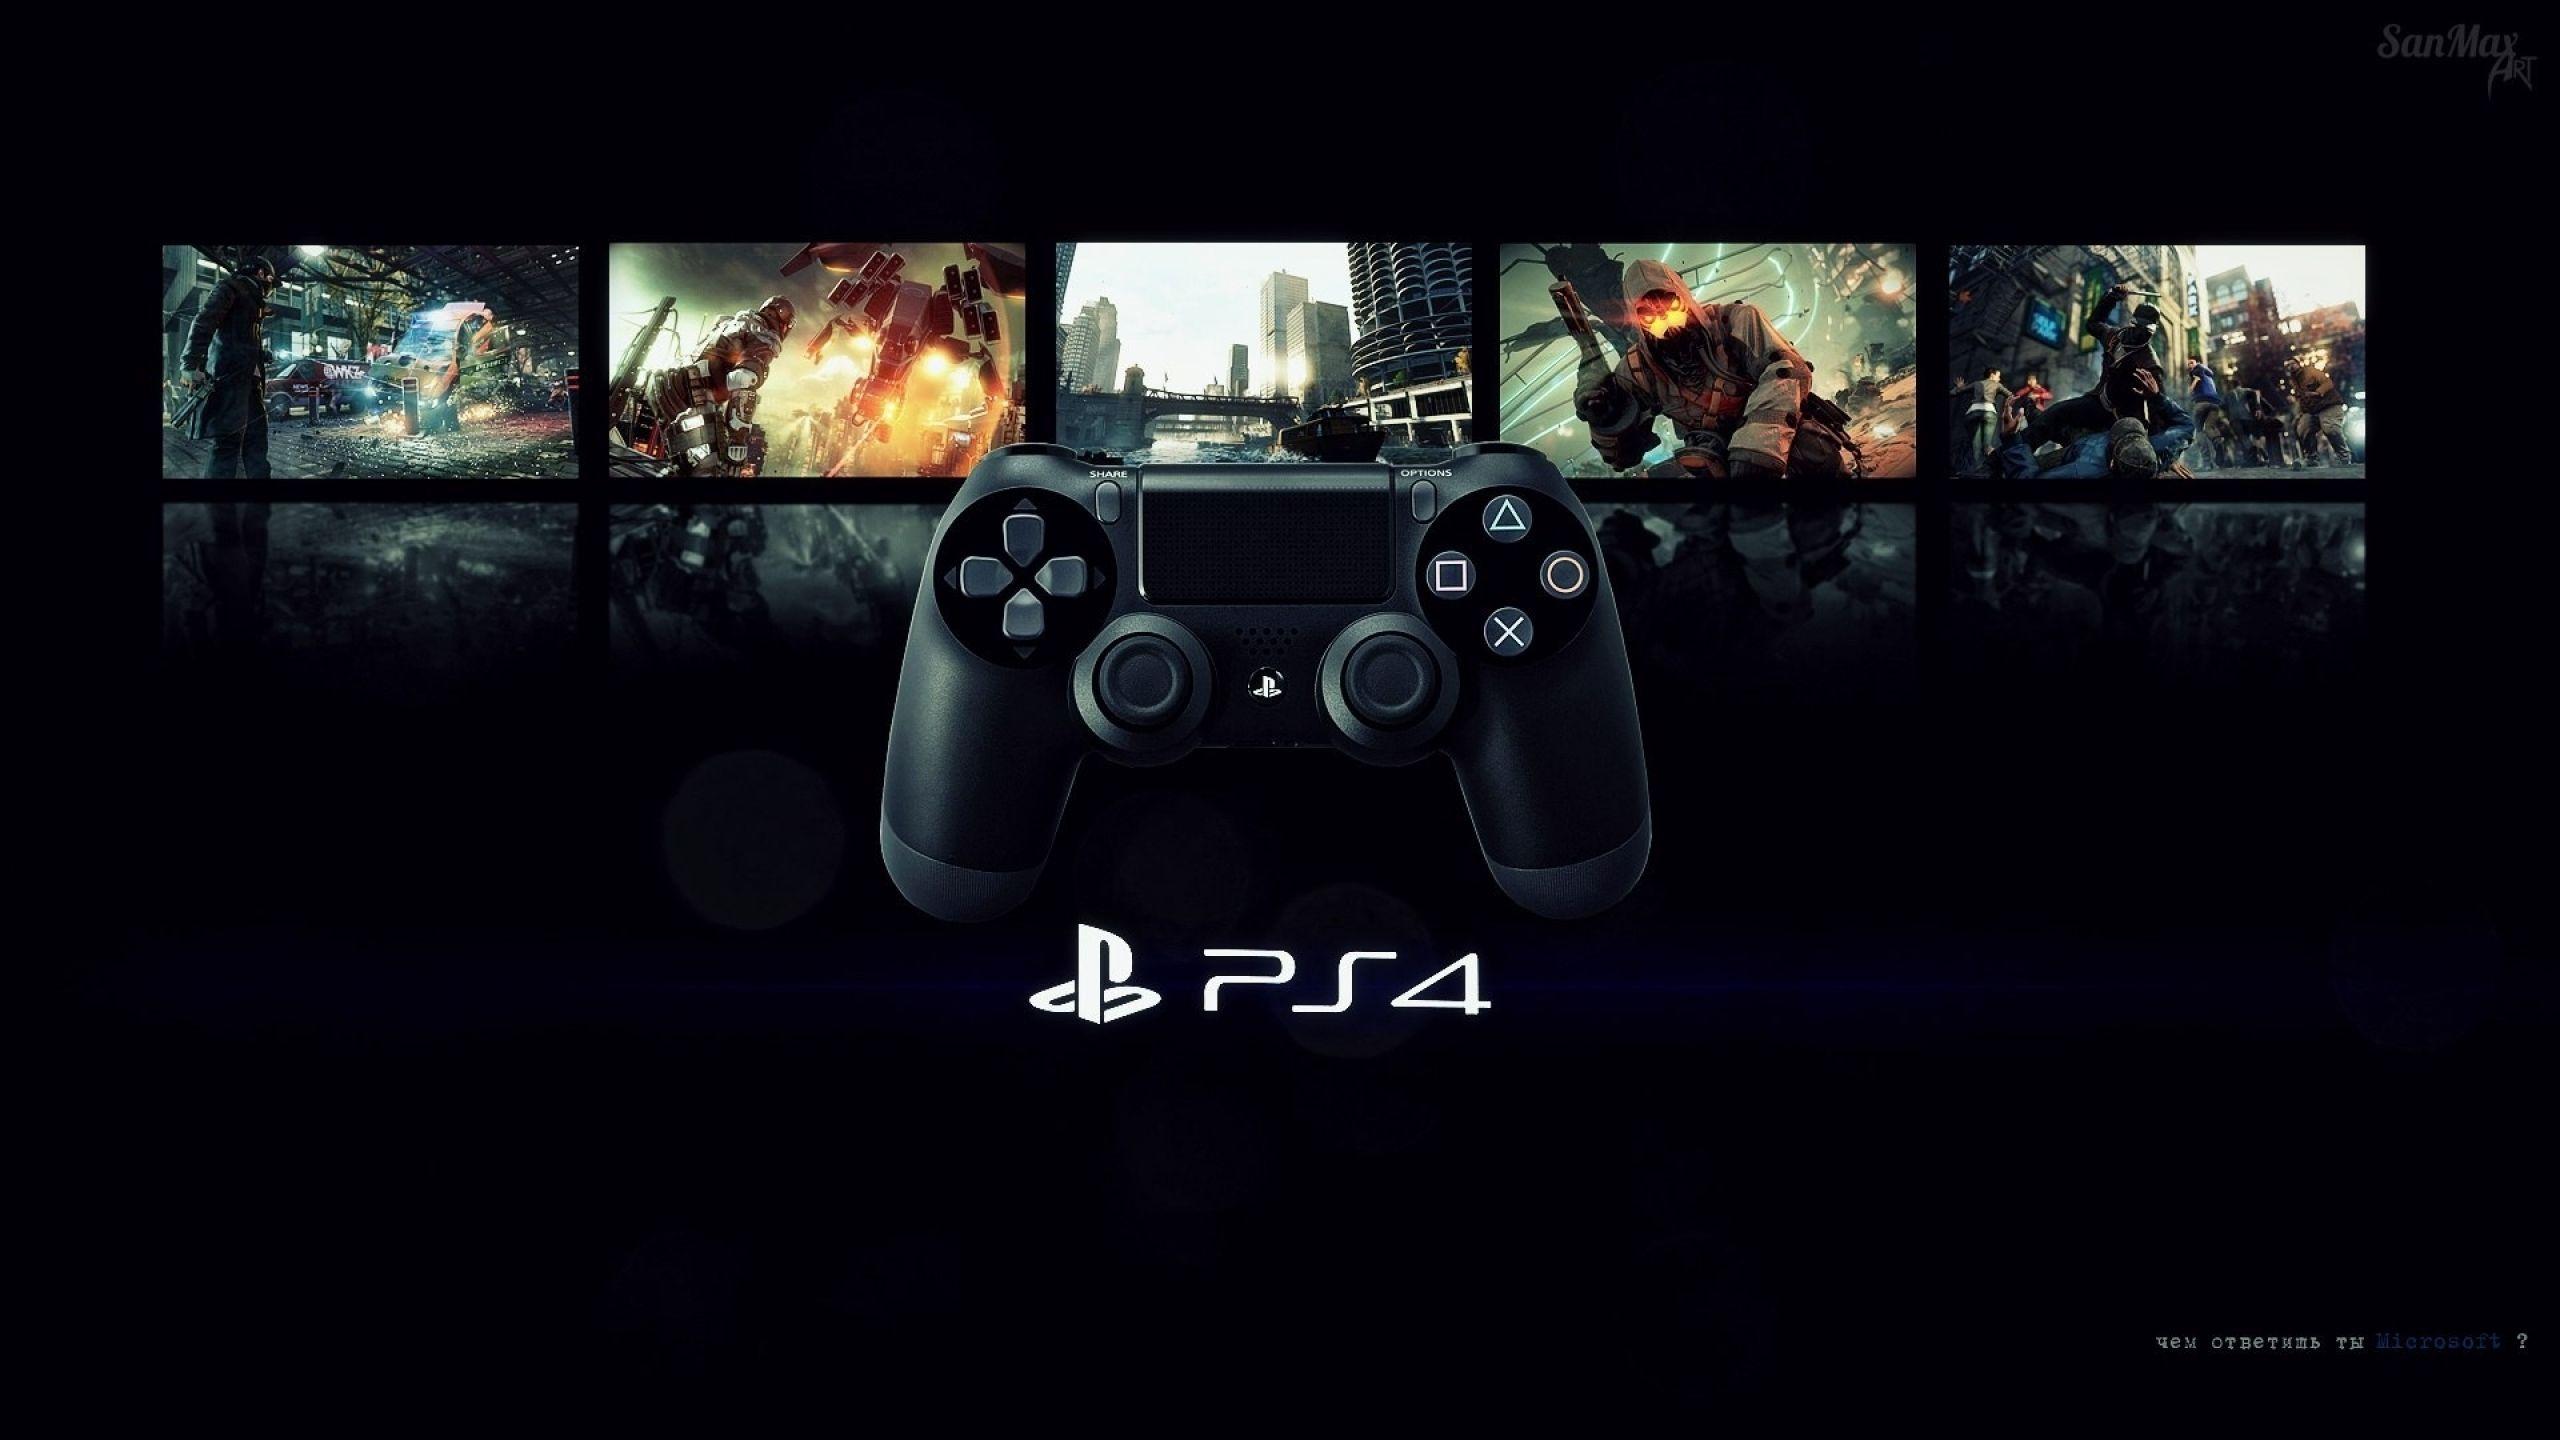 Ps4 Wallpapers : Ps4 Wallpapers (79+ images) : You can also upload and share your favorite ps4 4k wallpapers.